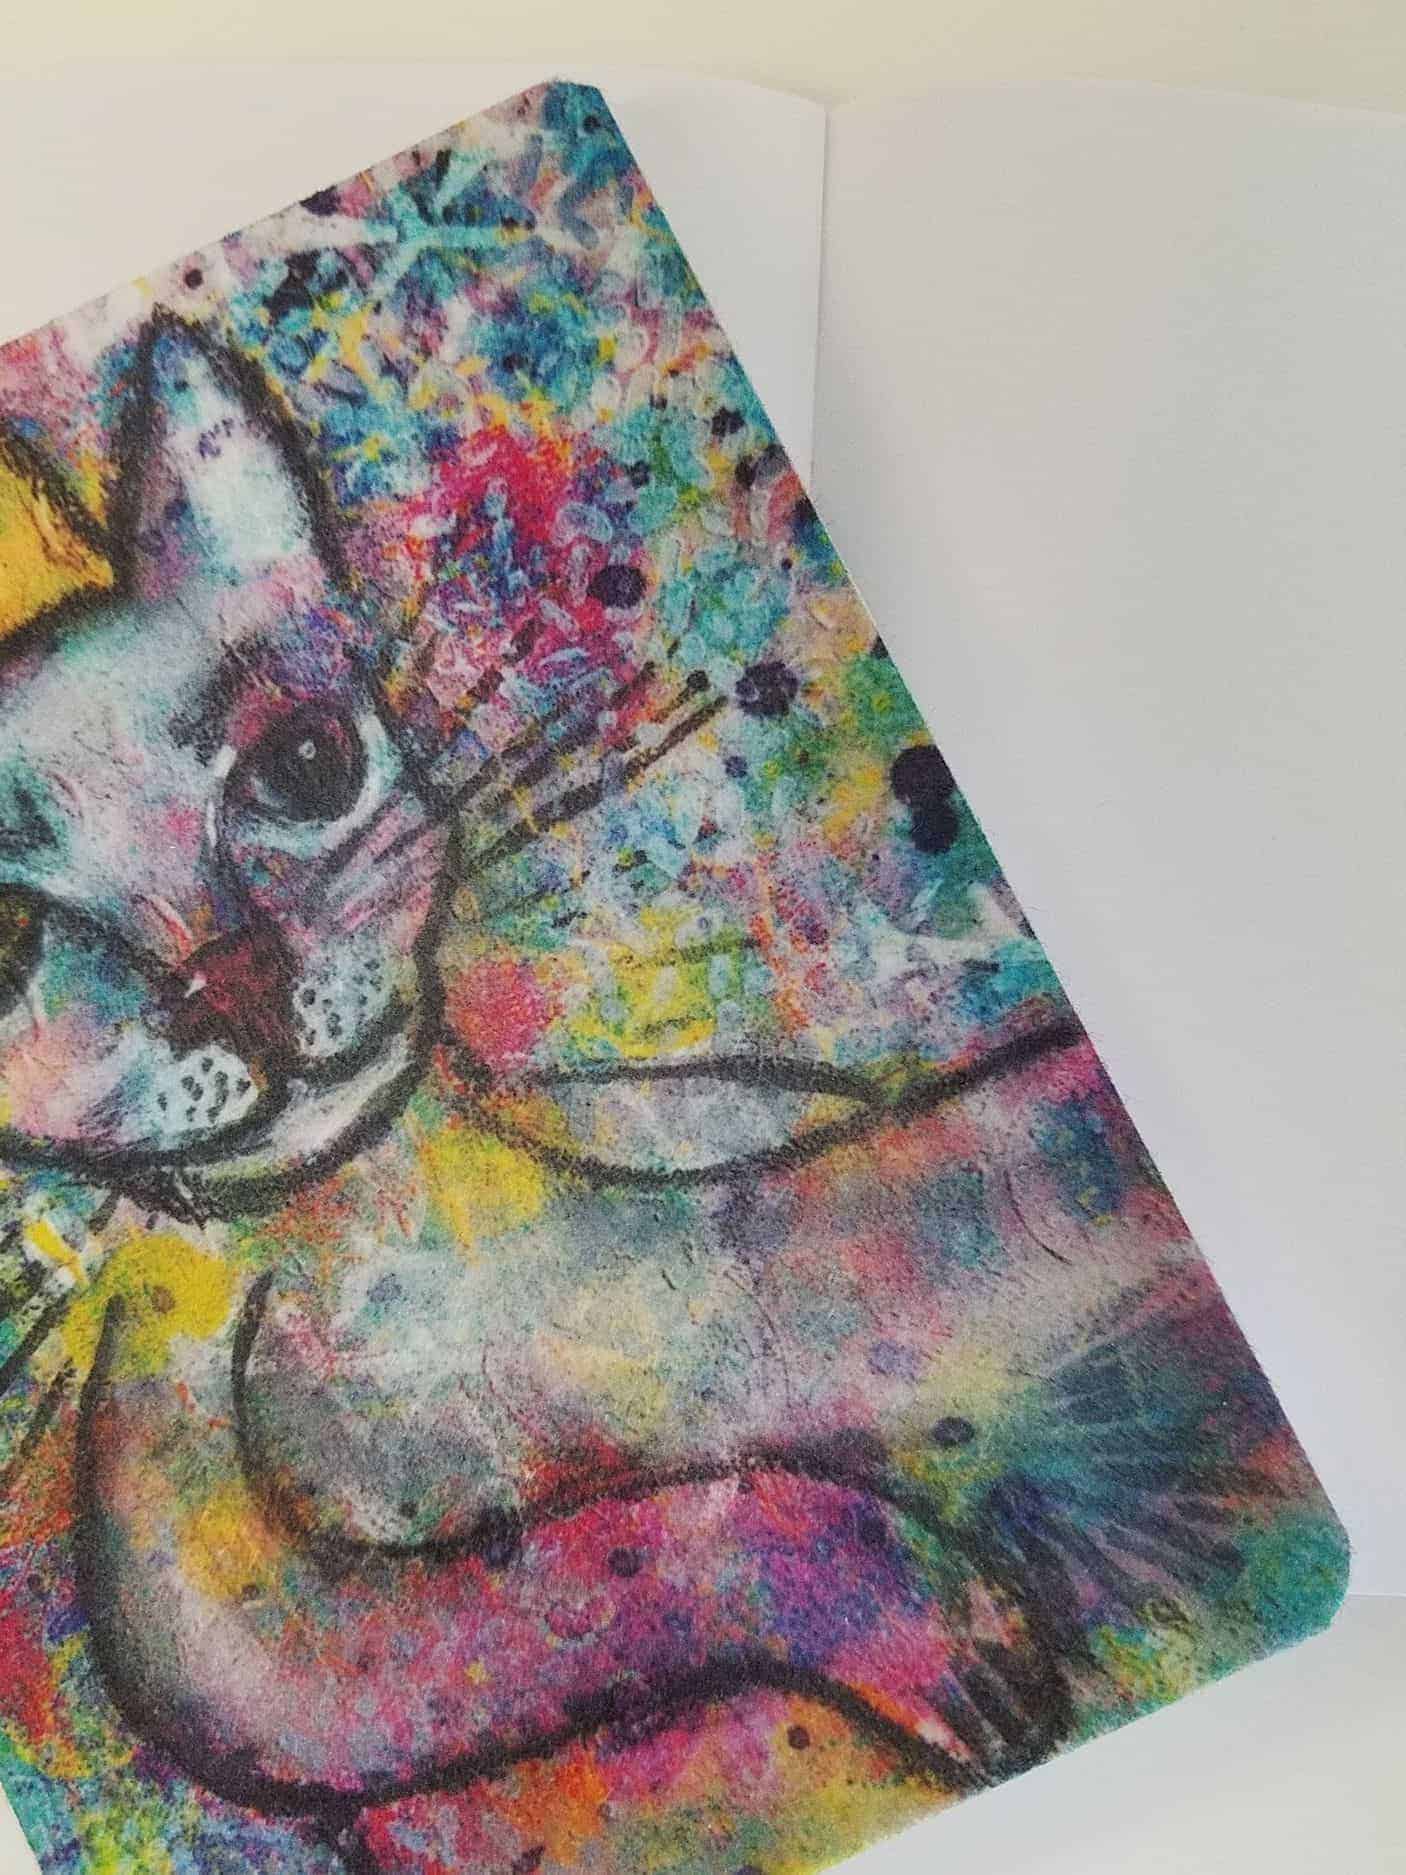 This Cool Cat "Luke" Crowned Critter Small Blank Journal for notes, lists, sketching and planning is made with love by Studio Patty D! Shop more unique gift ideas today with Spots Initiatives, the best way to support creators.